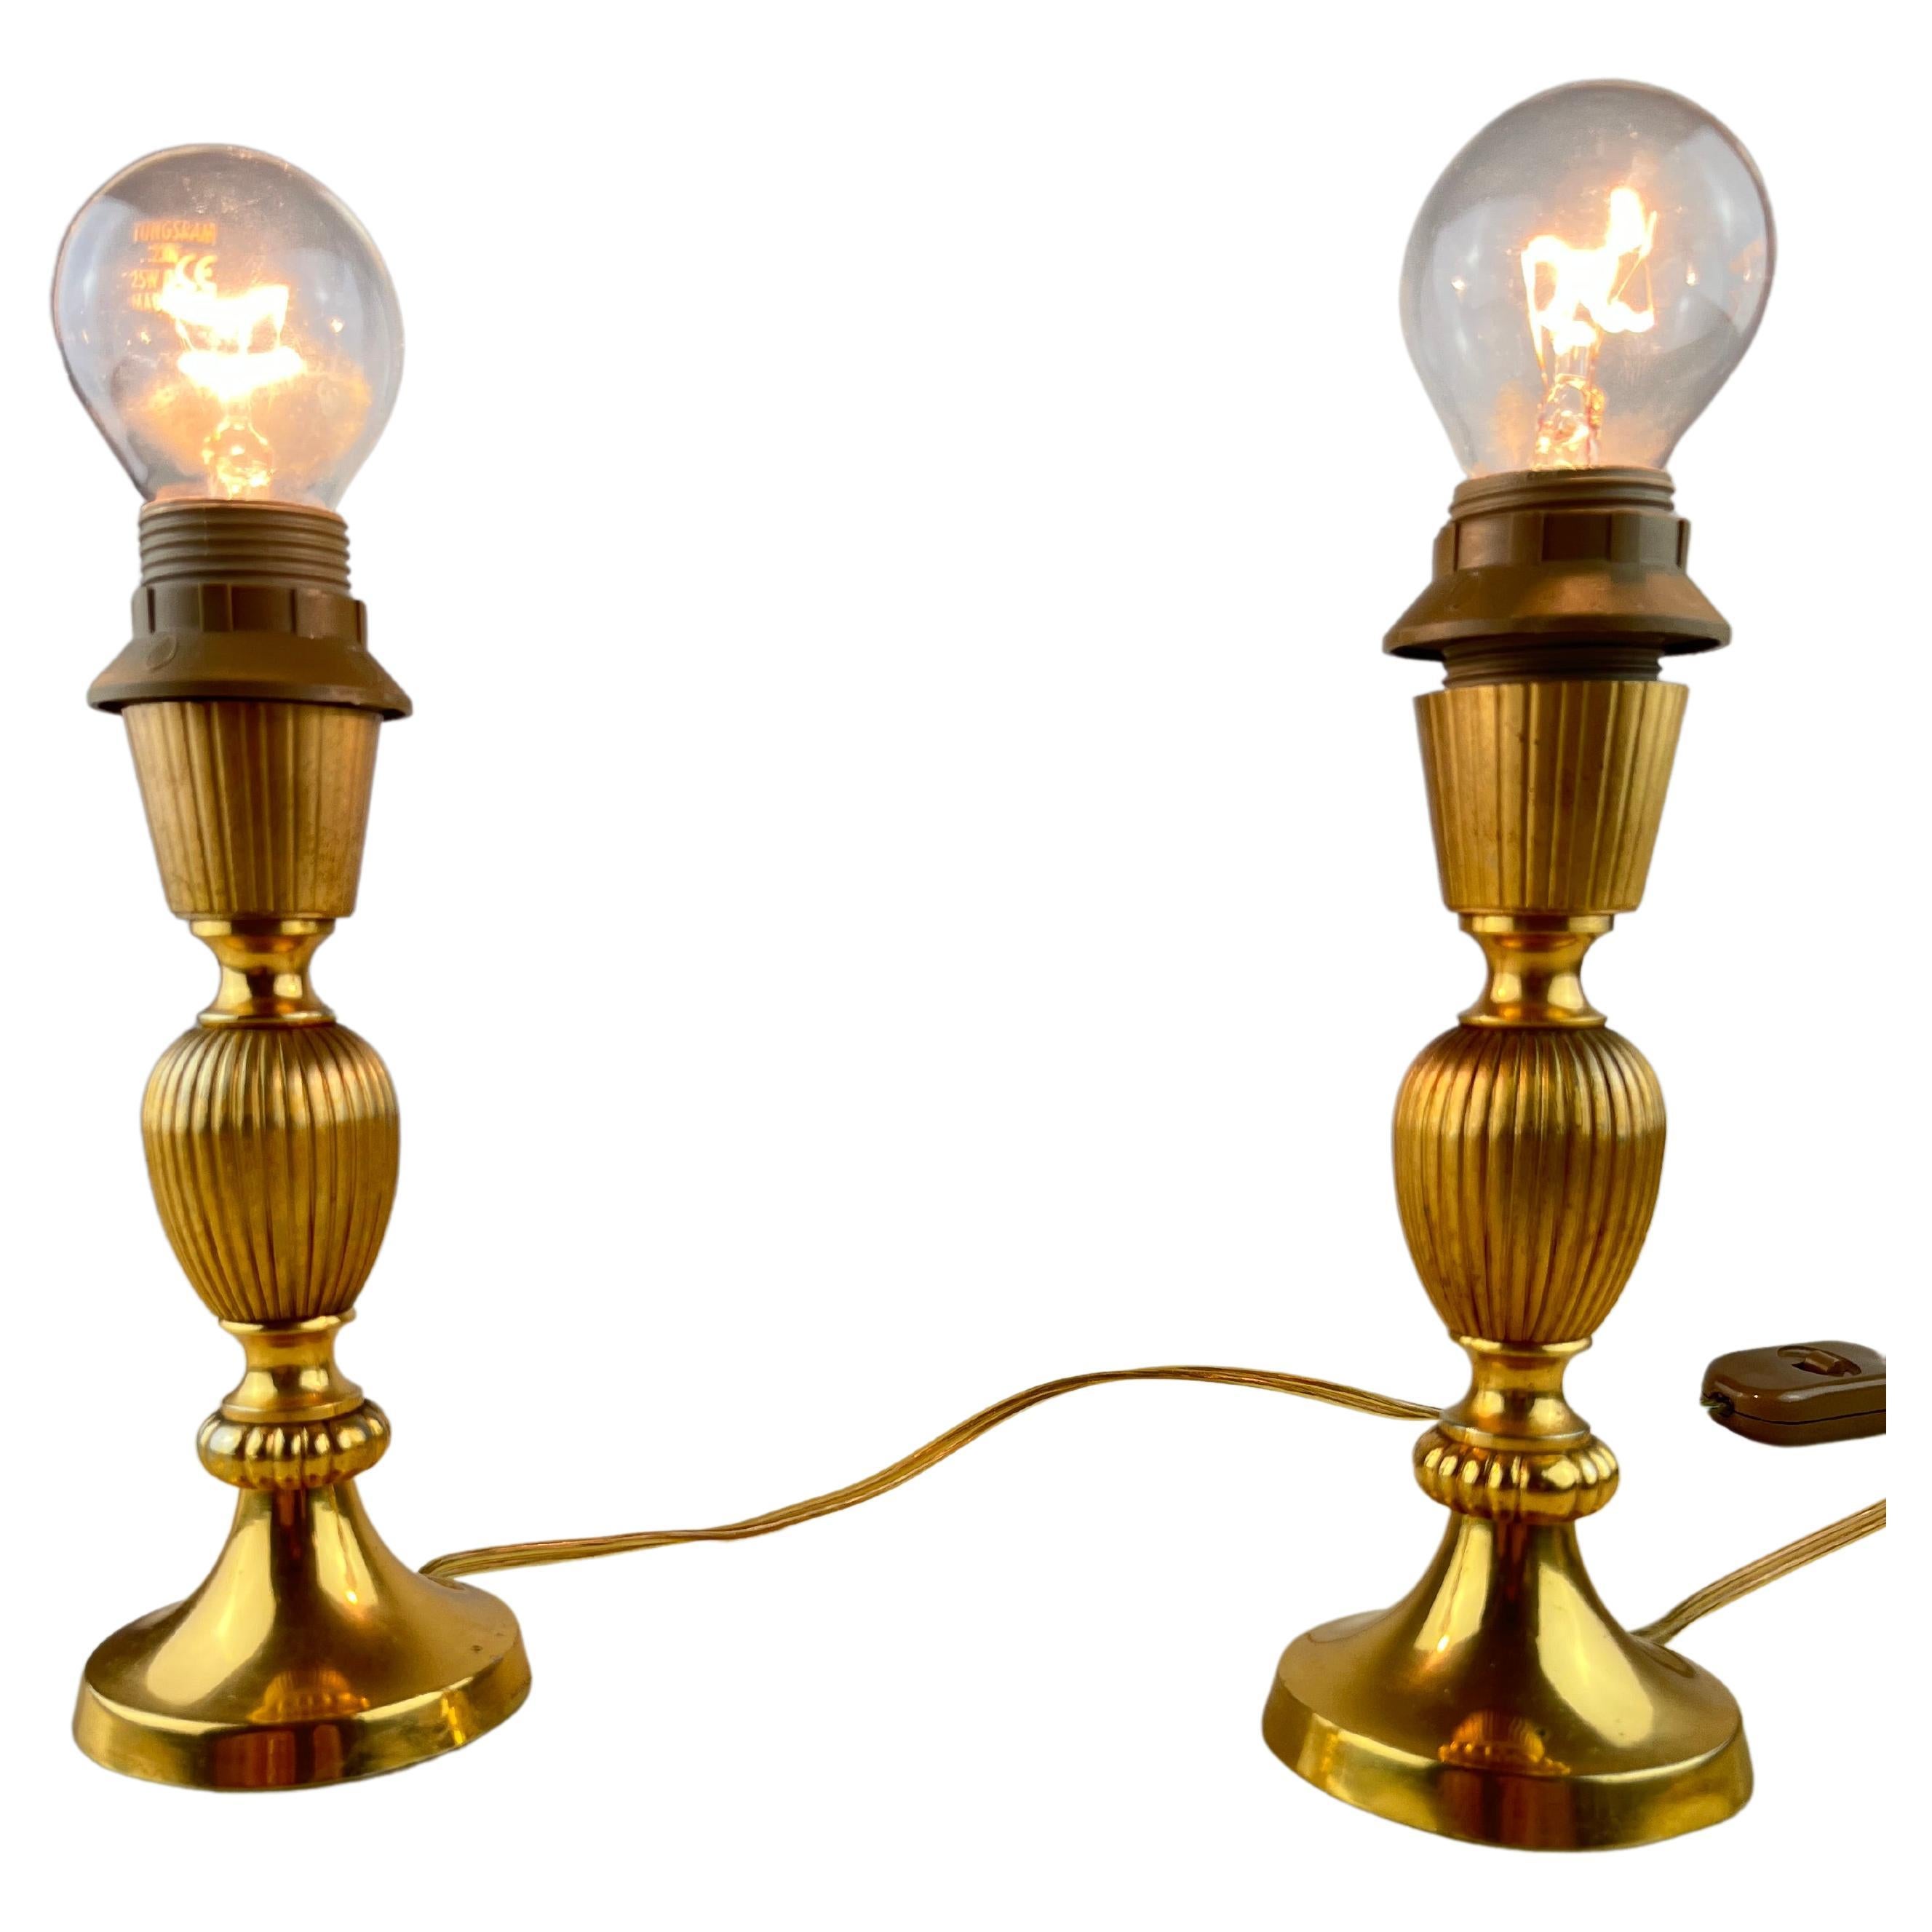 Pair of Italian Brass Bedside Lamps by Gaetano Sciolari, 1970s For Sale